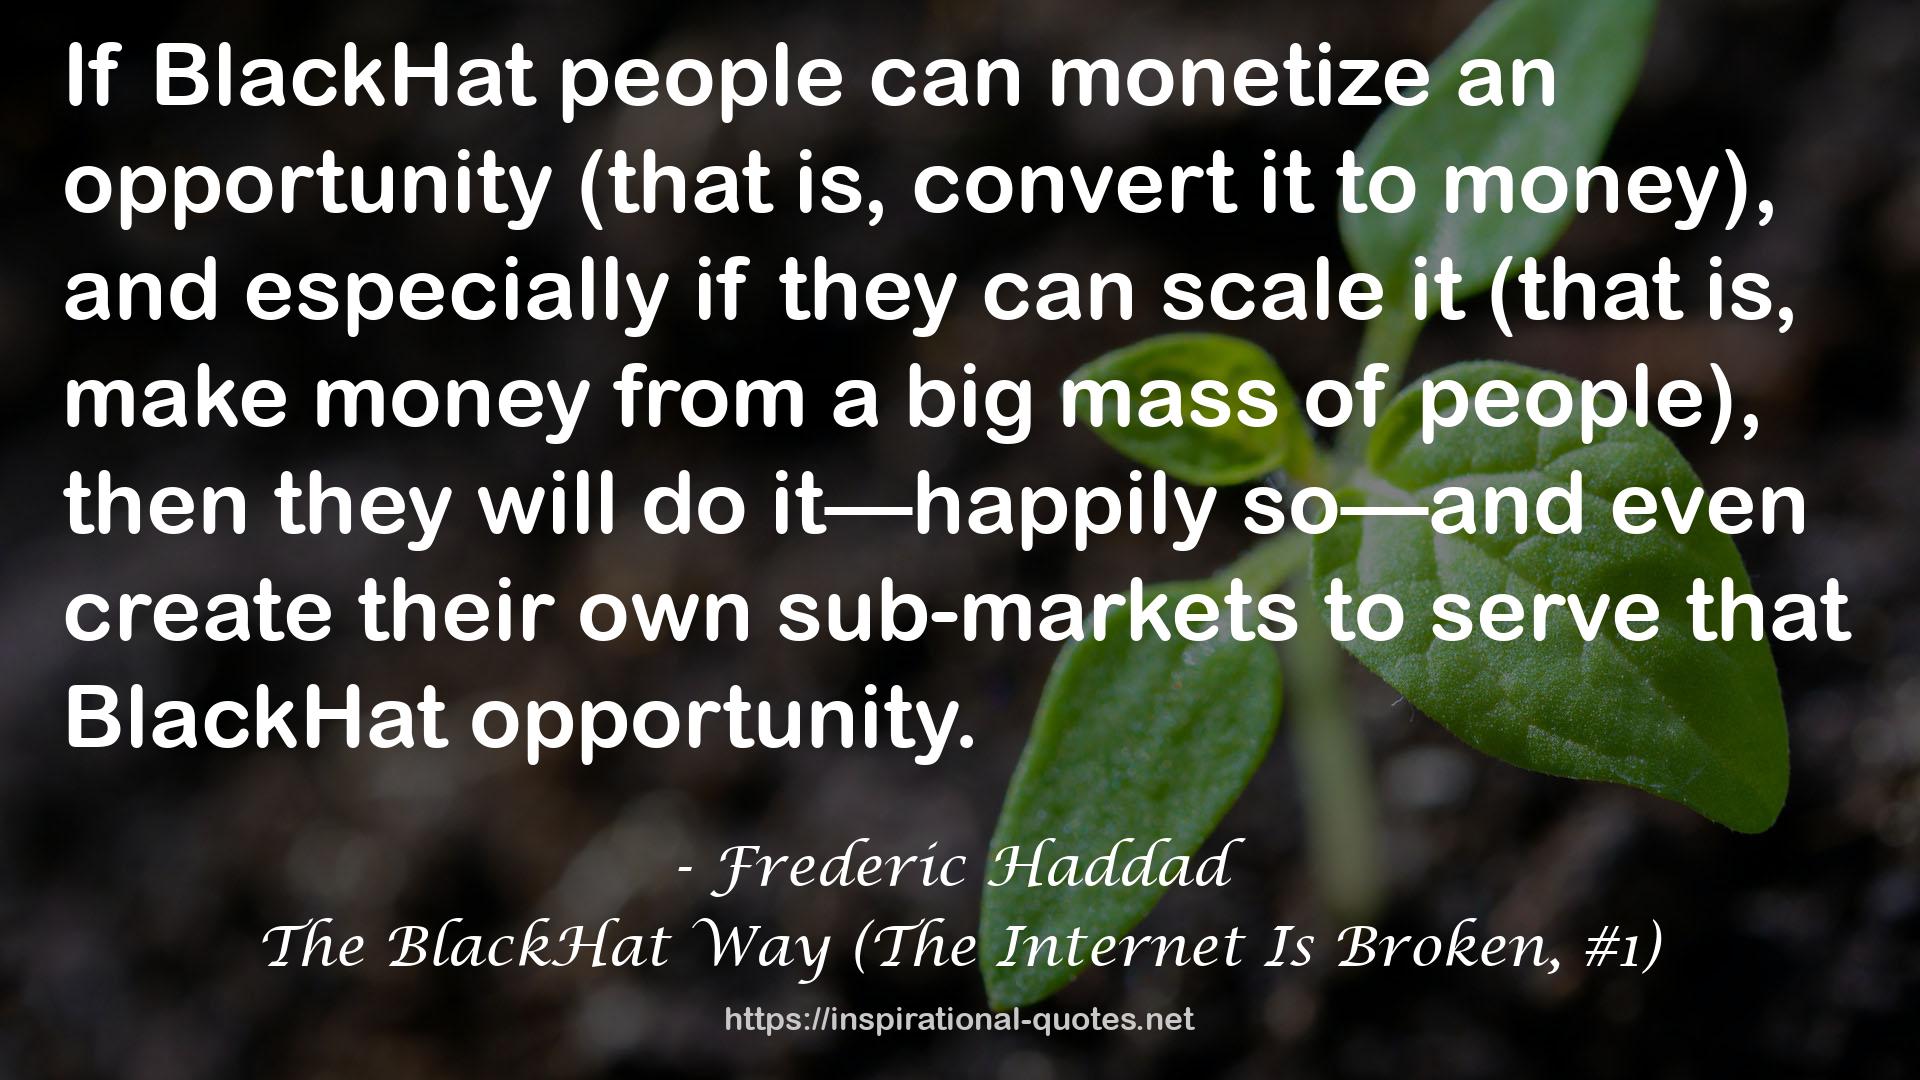 Frederic Haddad QUOTES